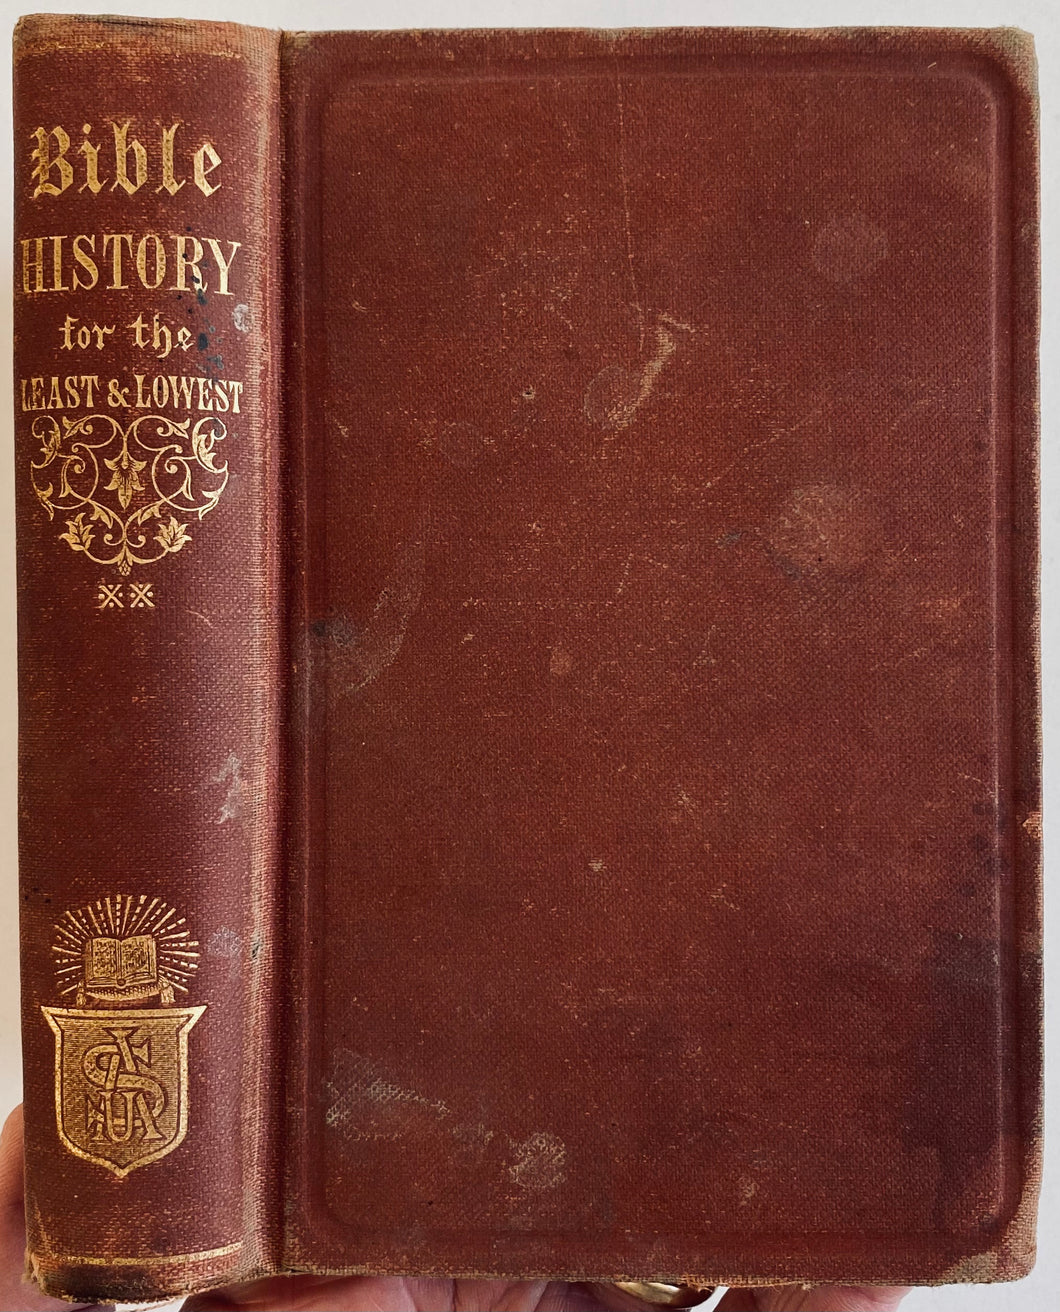 1854 Bible Stories for the Least and the Lowest - Retold for the Deaf and Dumb.